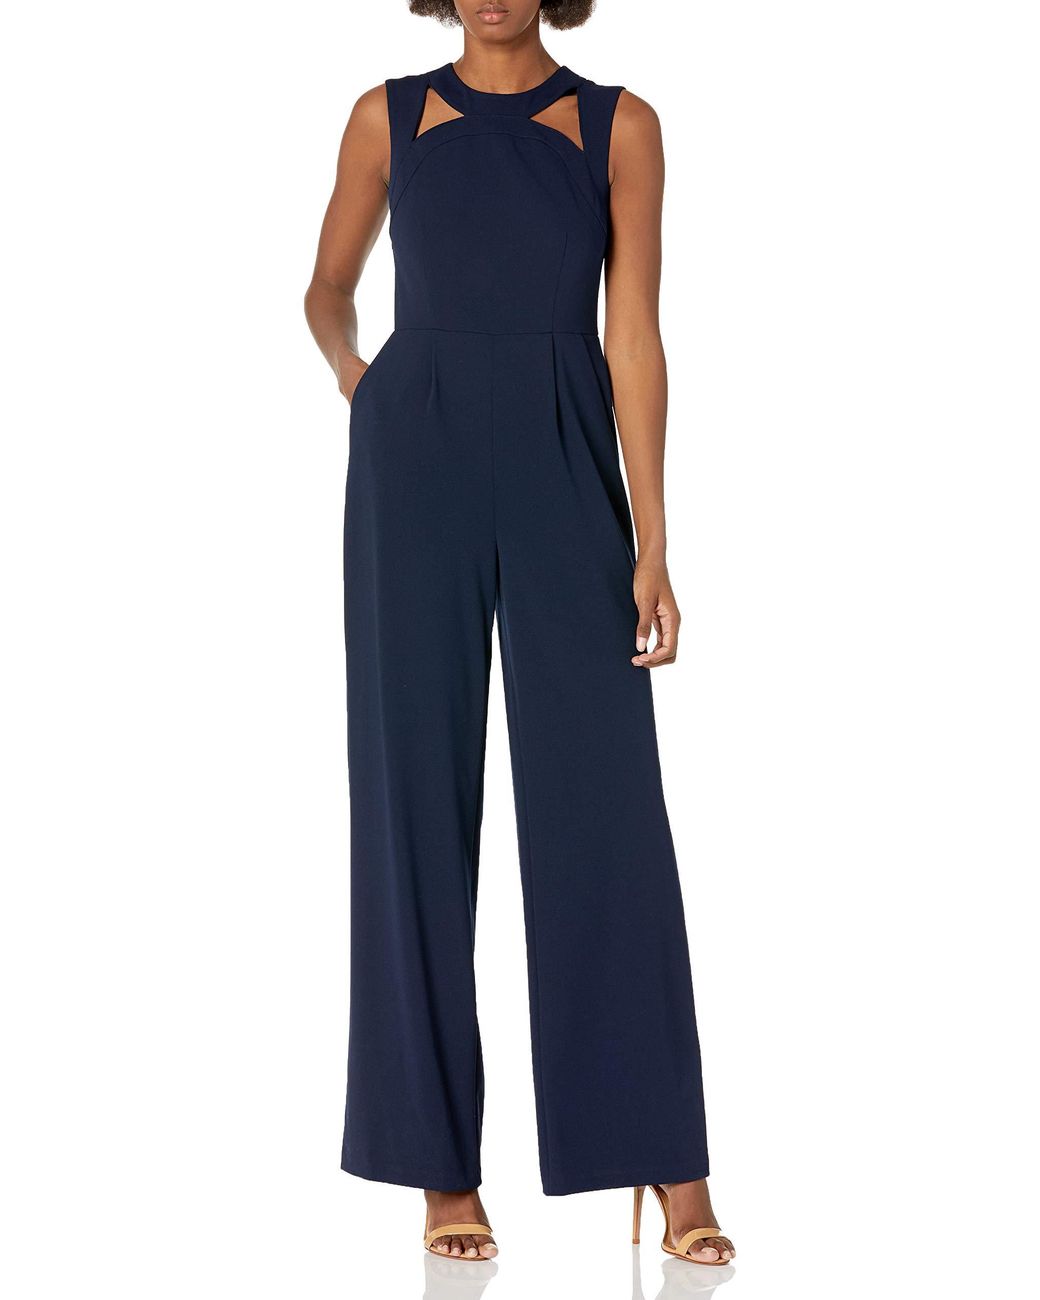 Calvin Klein Sleeveless Jumpsuit With Cut Outs in Indigo (Blue) | Lyst